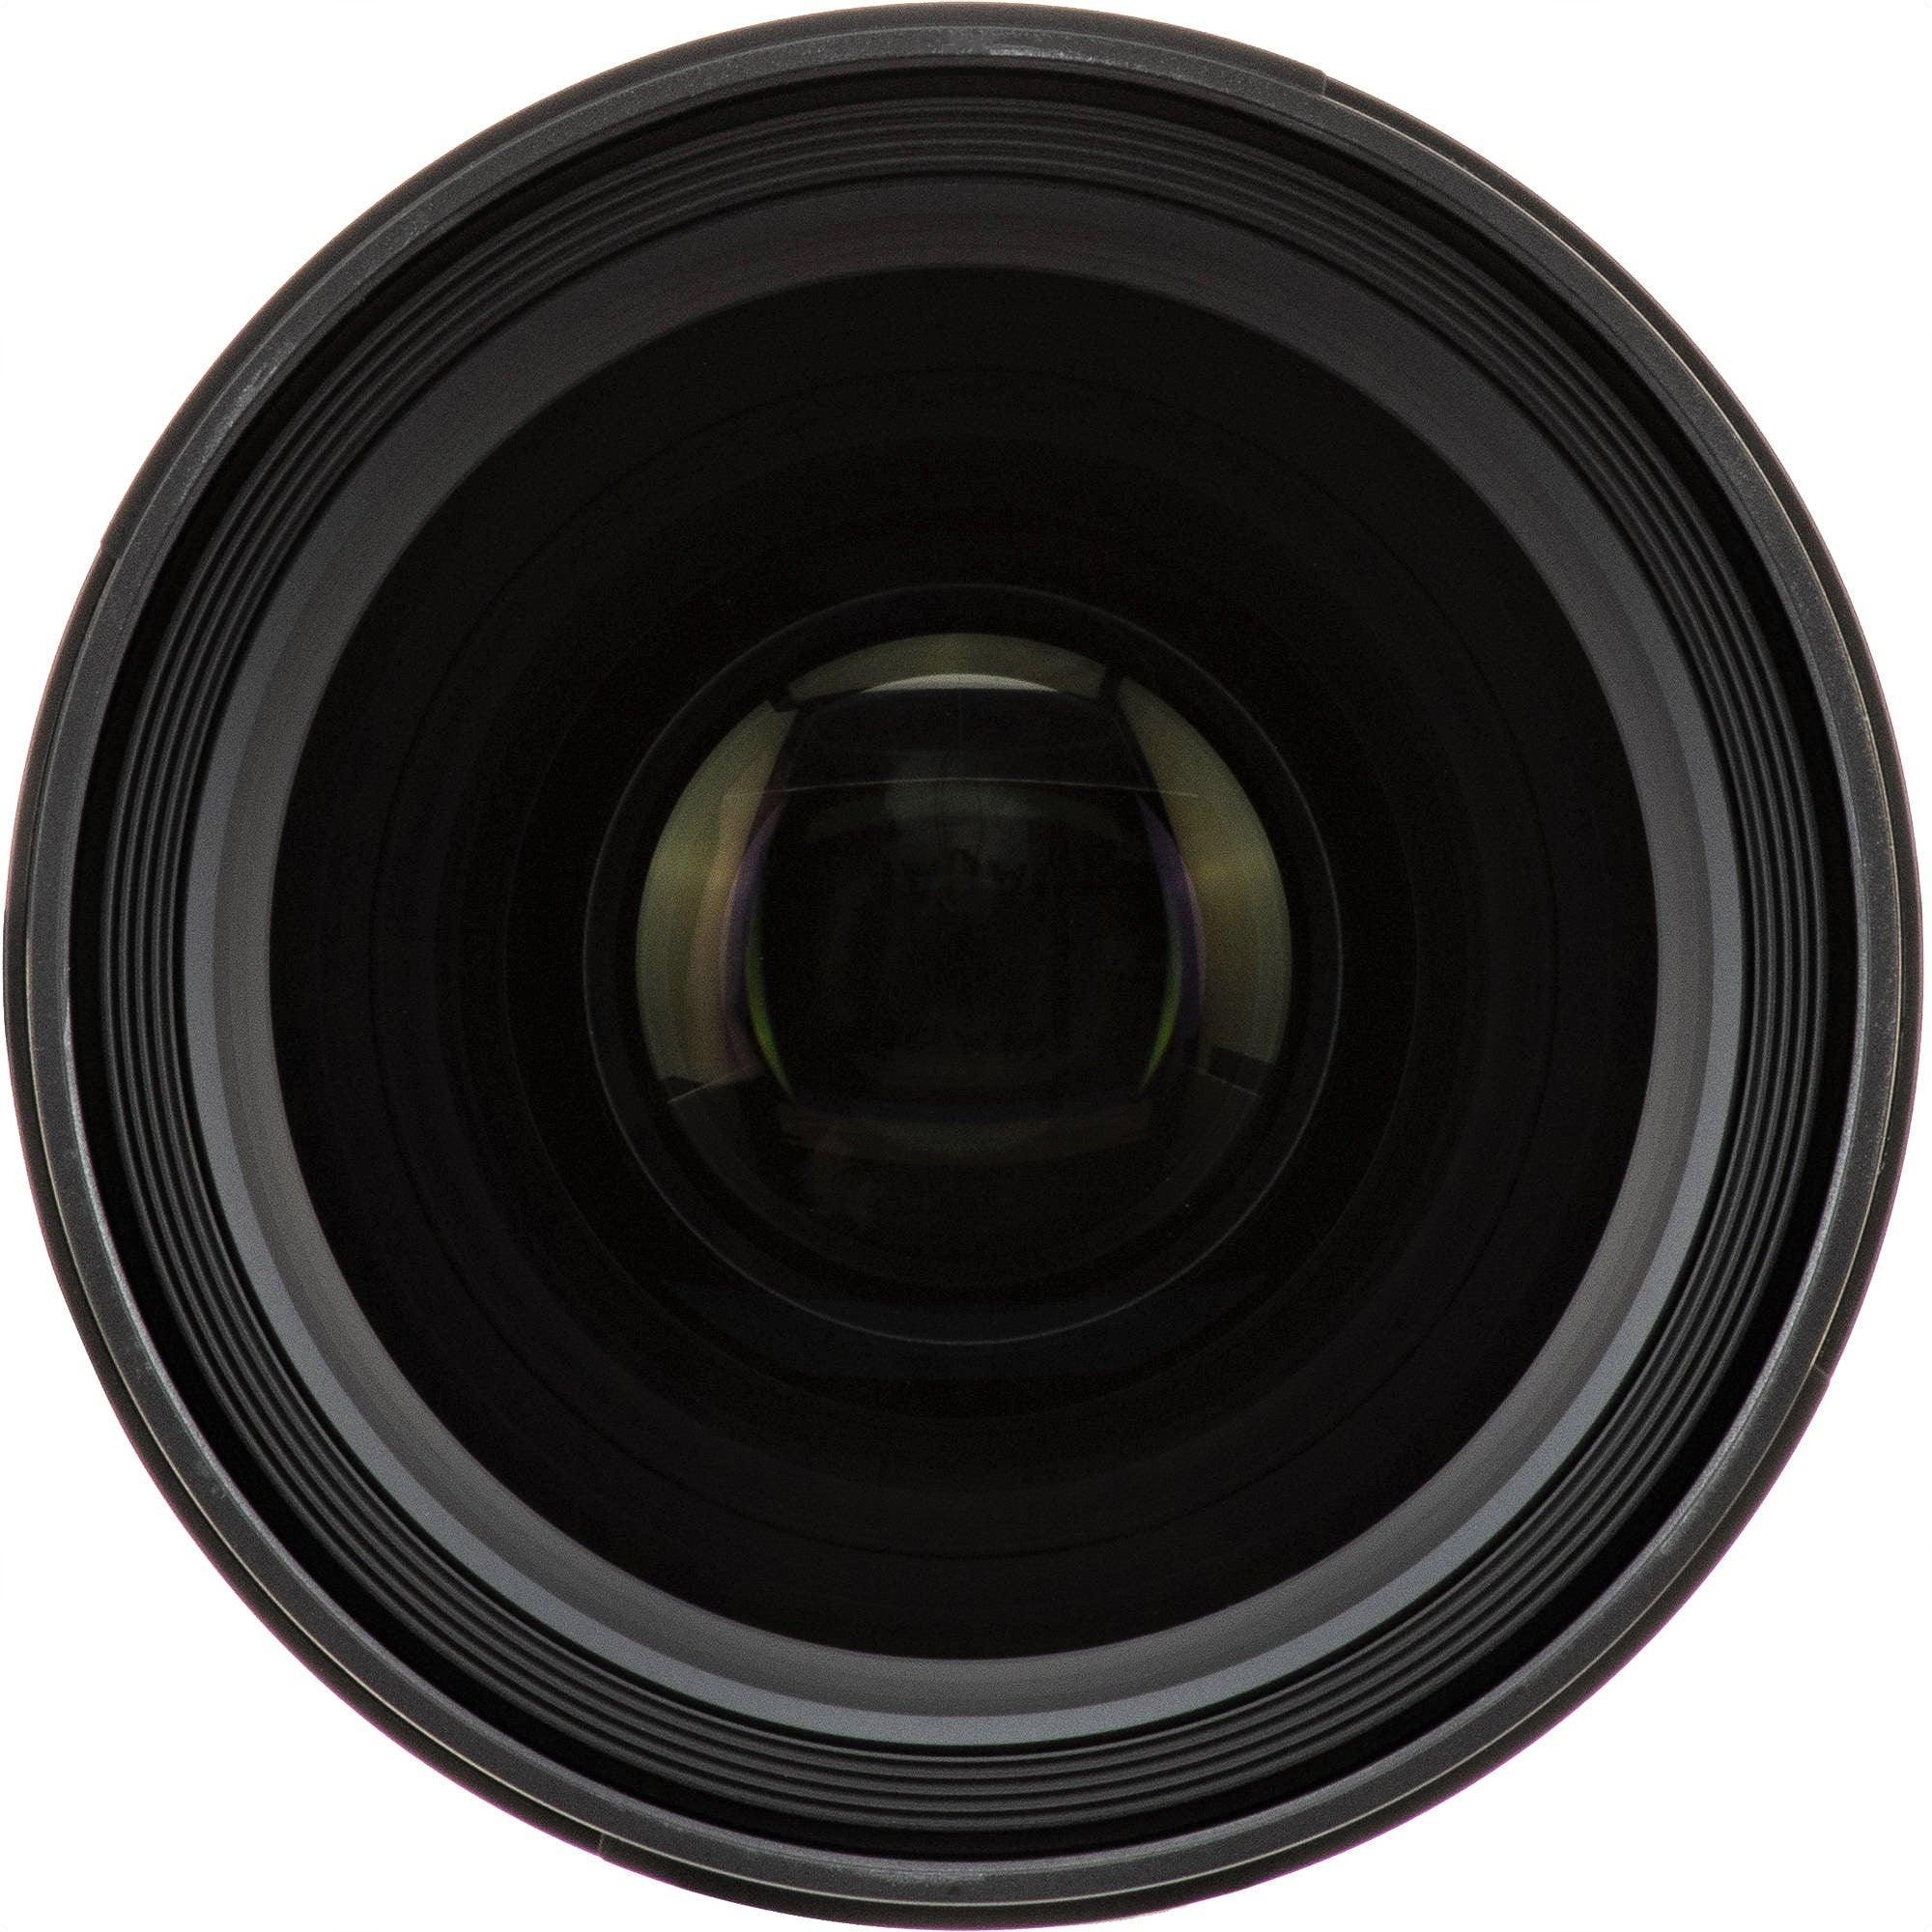 Sigma 40mm F1.4 DG HSM Art Lens for Sigma SA in a Front Close-Up View